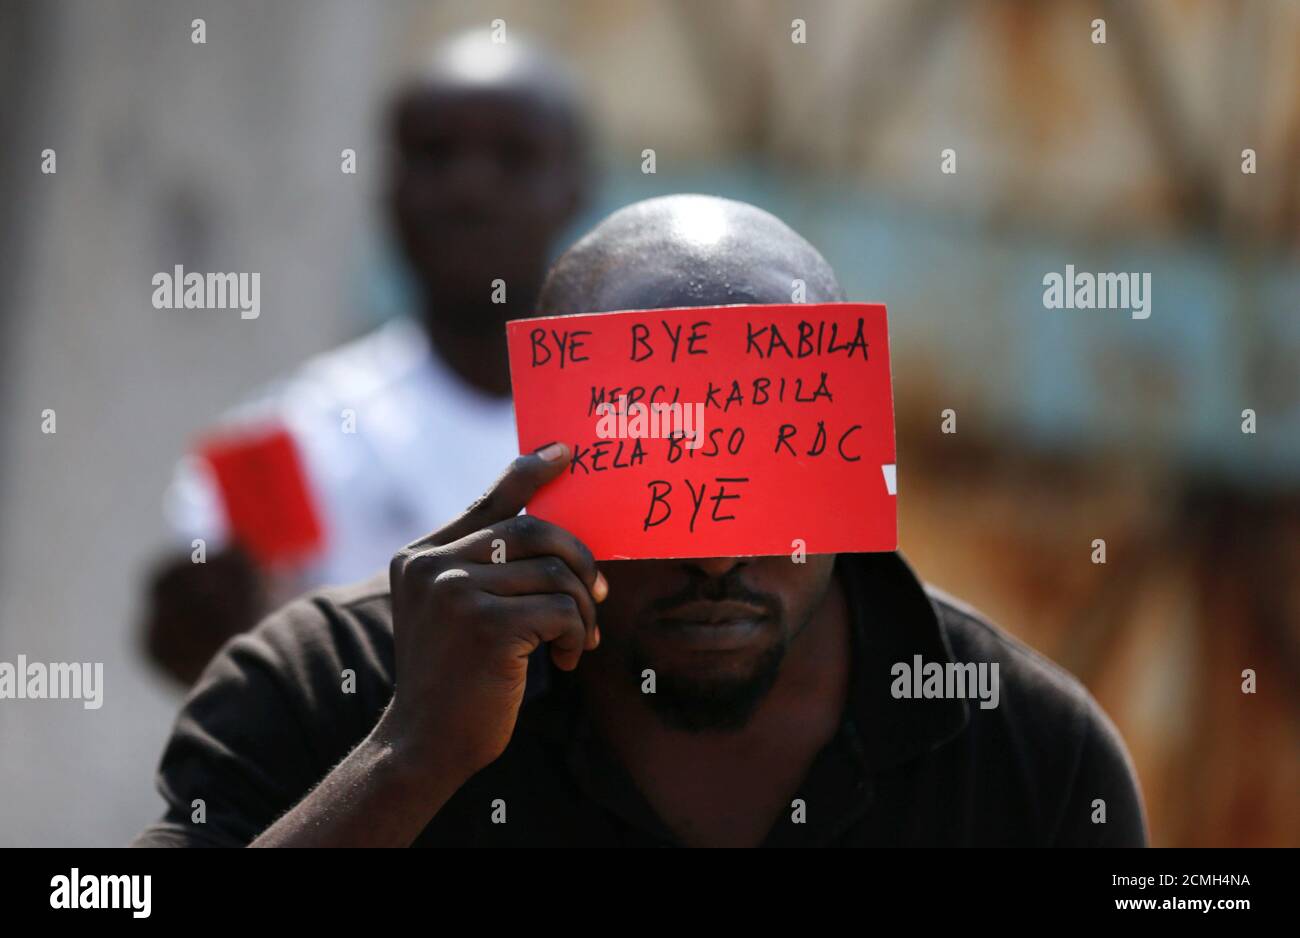 A Congolese opposition party supporter displays a red card against President Joseph Kabila in Kinshasa, Democratic Republic of Congo December 19, 2016. REUTERS/Thomas Mukoya     TPX IMAGES OF THE DAY Stock Photo